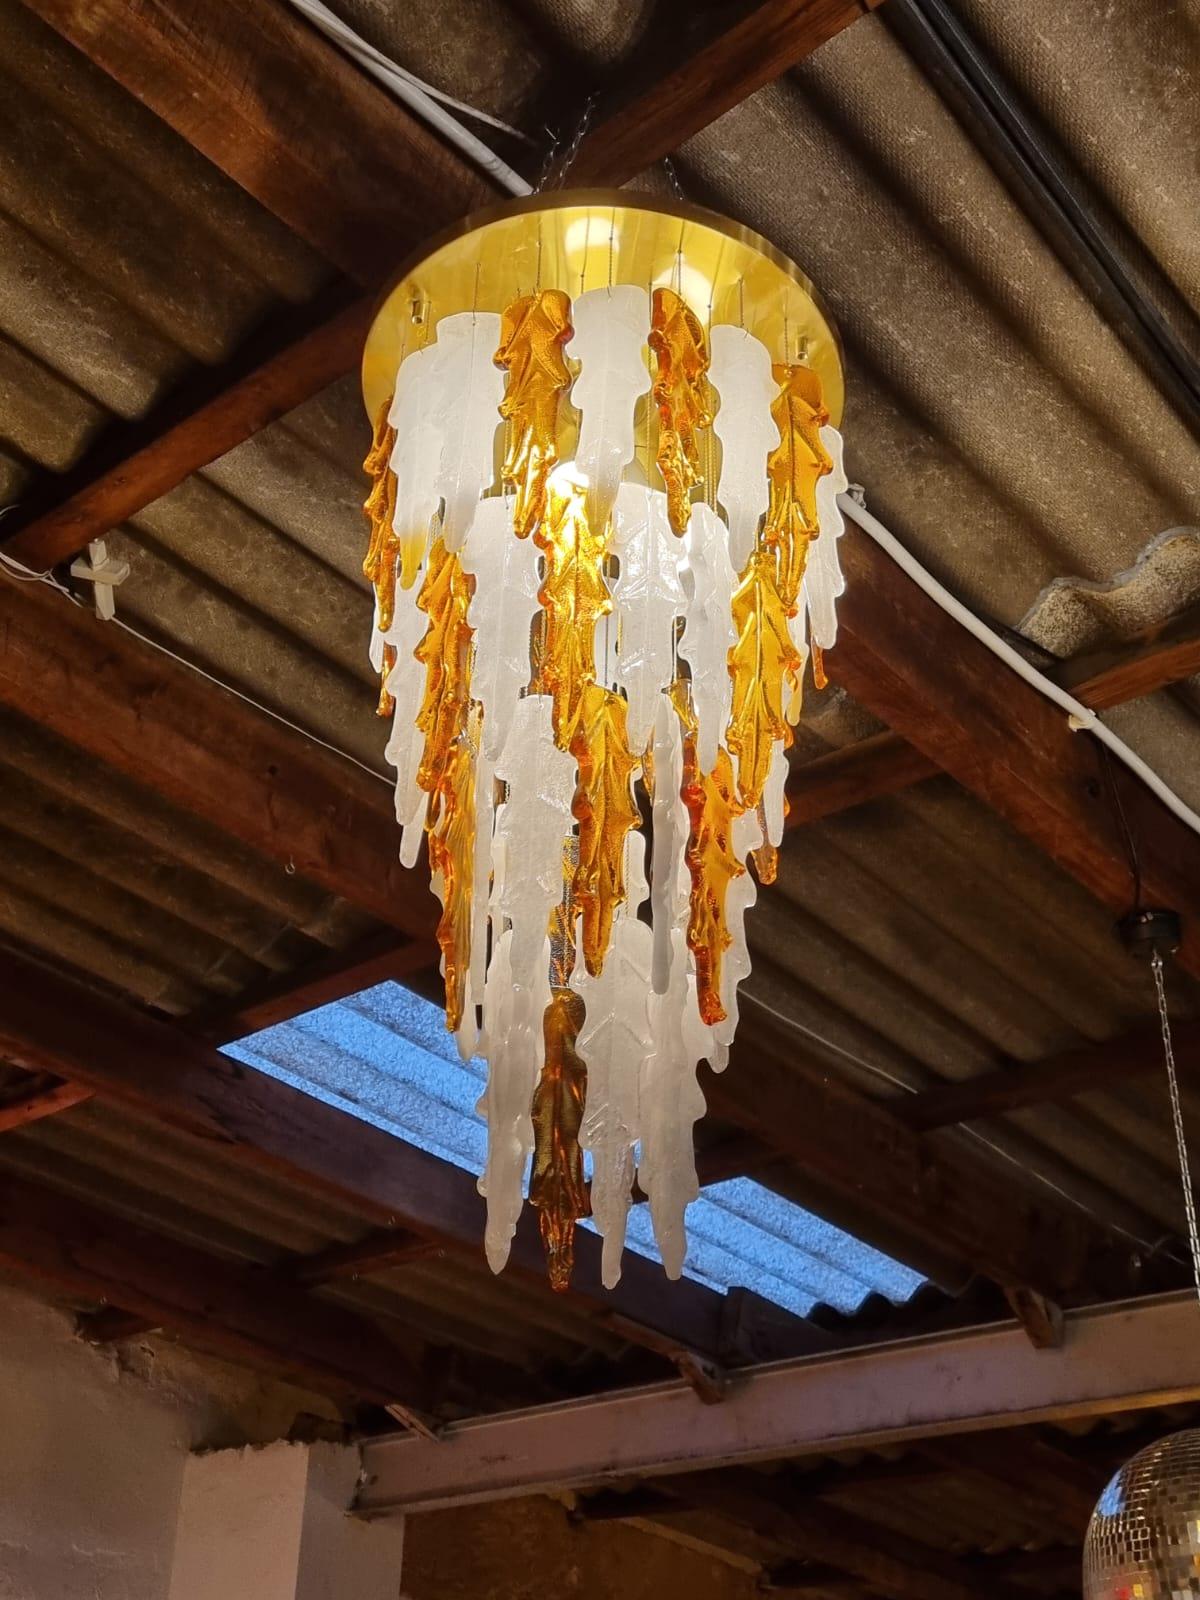 Magnificent and rare bicolor suspension lamp poliarte, designed and produced by Albani Poli in Murano, Italy in the 1970s.
Composed of more than two shades, white and caramel color, blown glass and a brass structure, this striking chandelier in